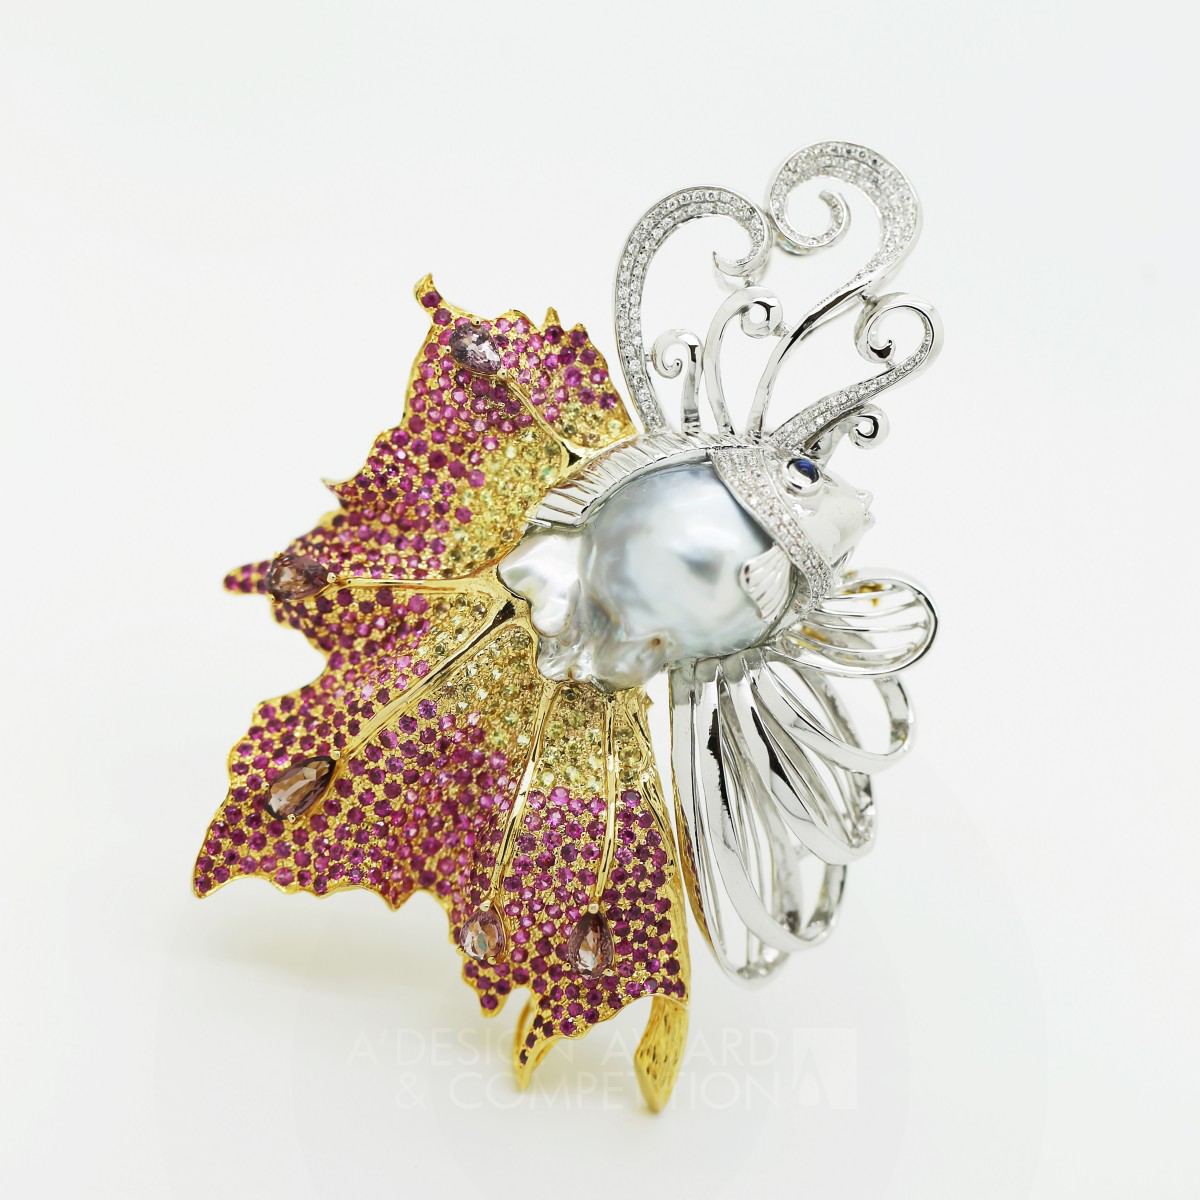 The power of charm Brooch by Meng Han, Yu